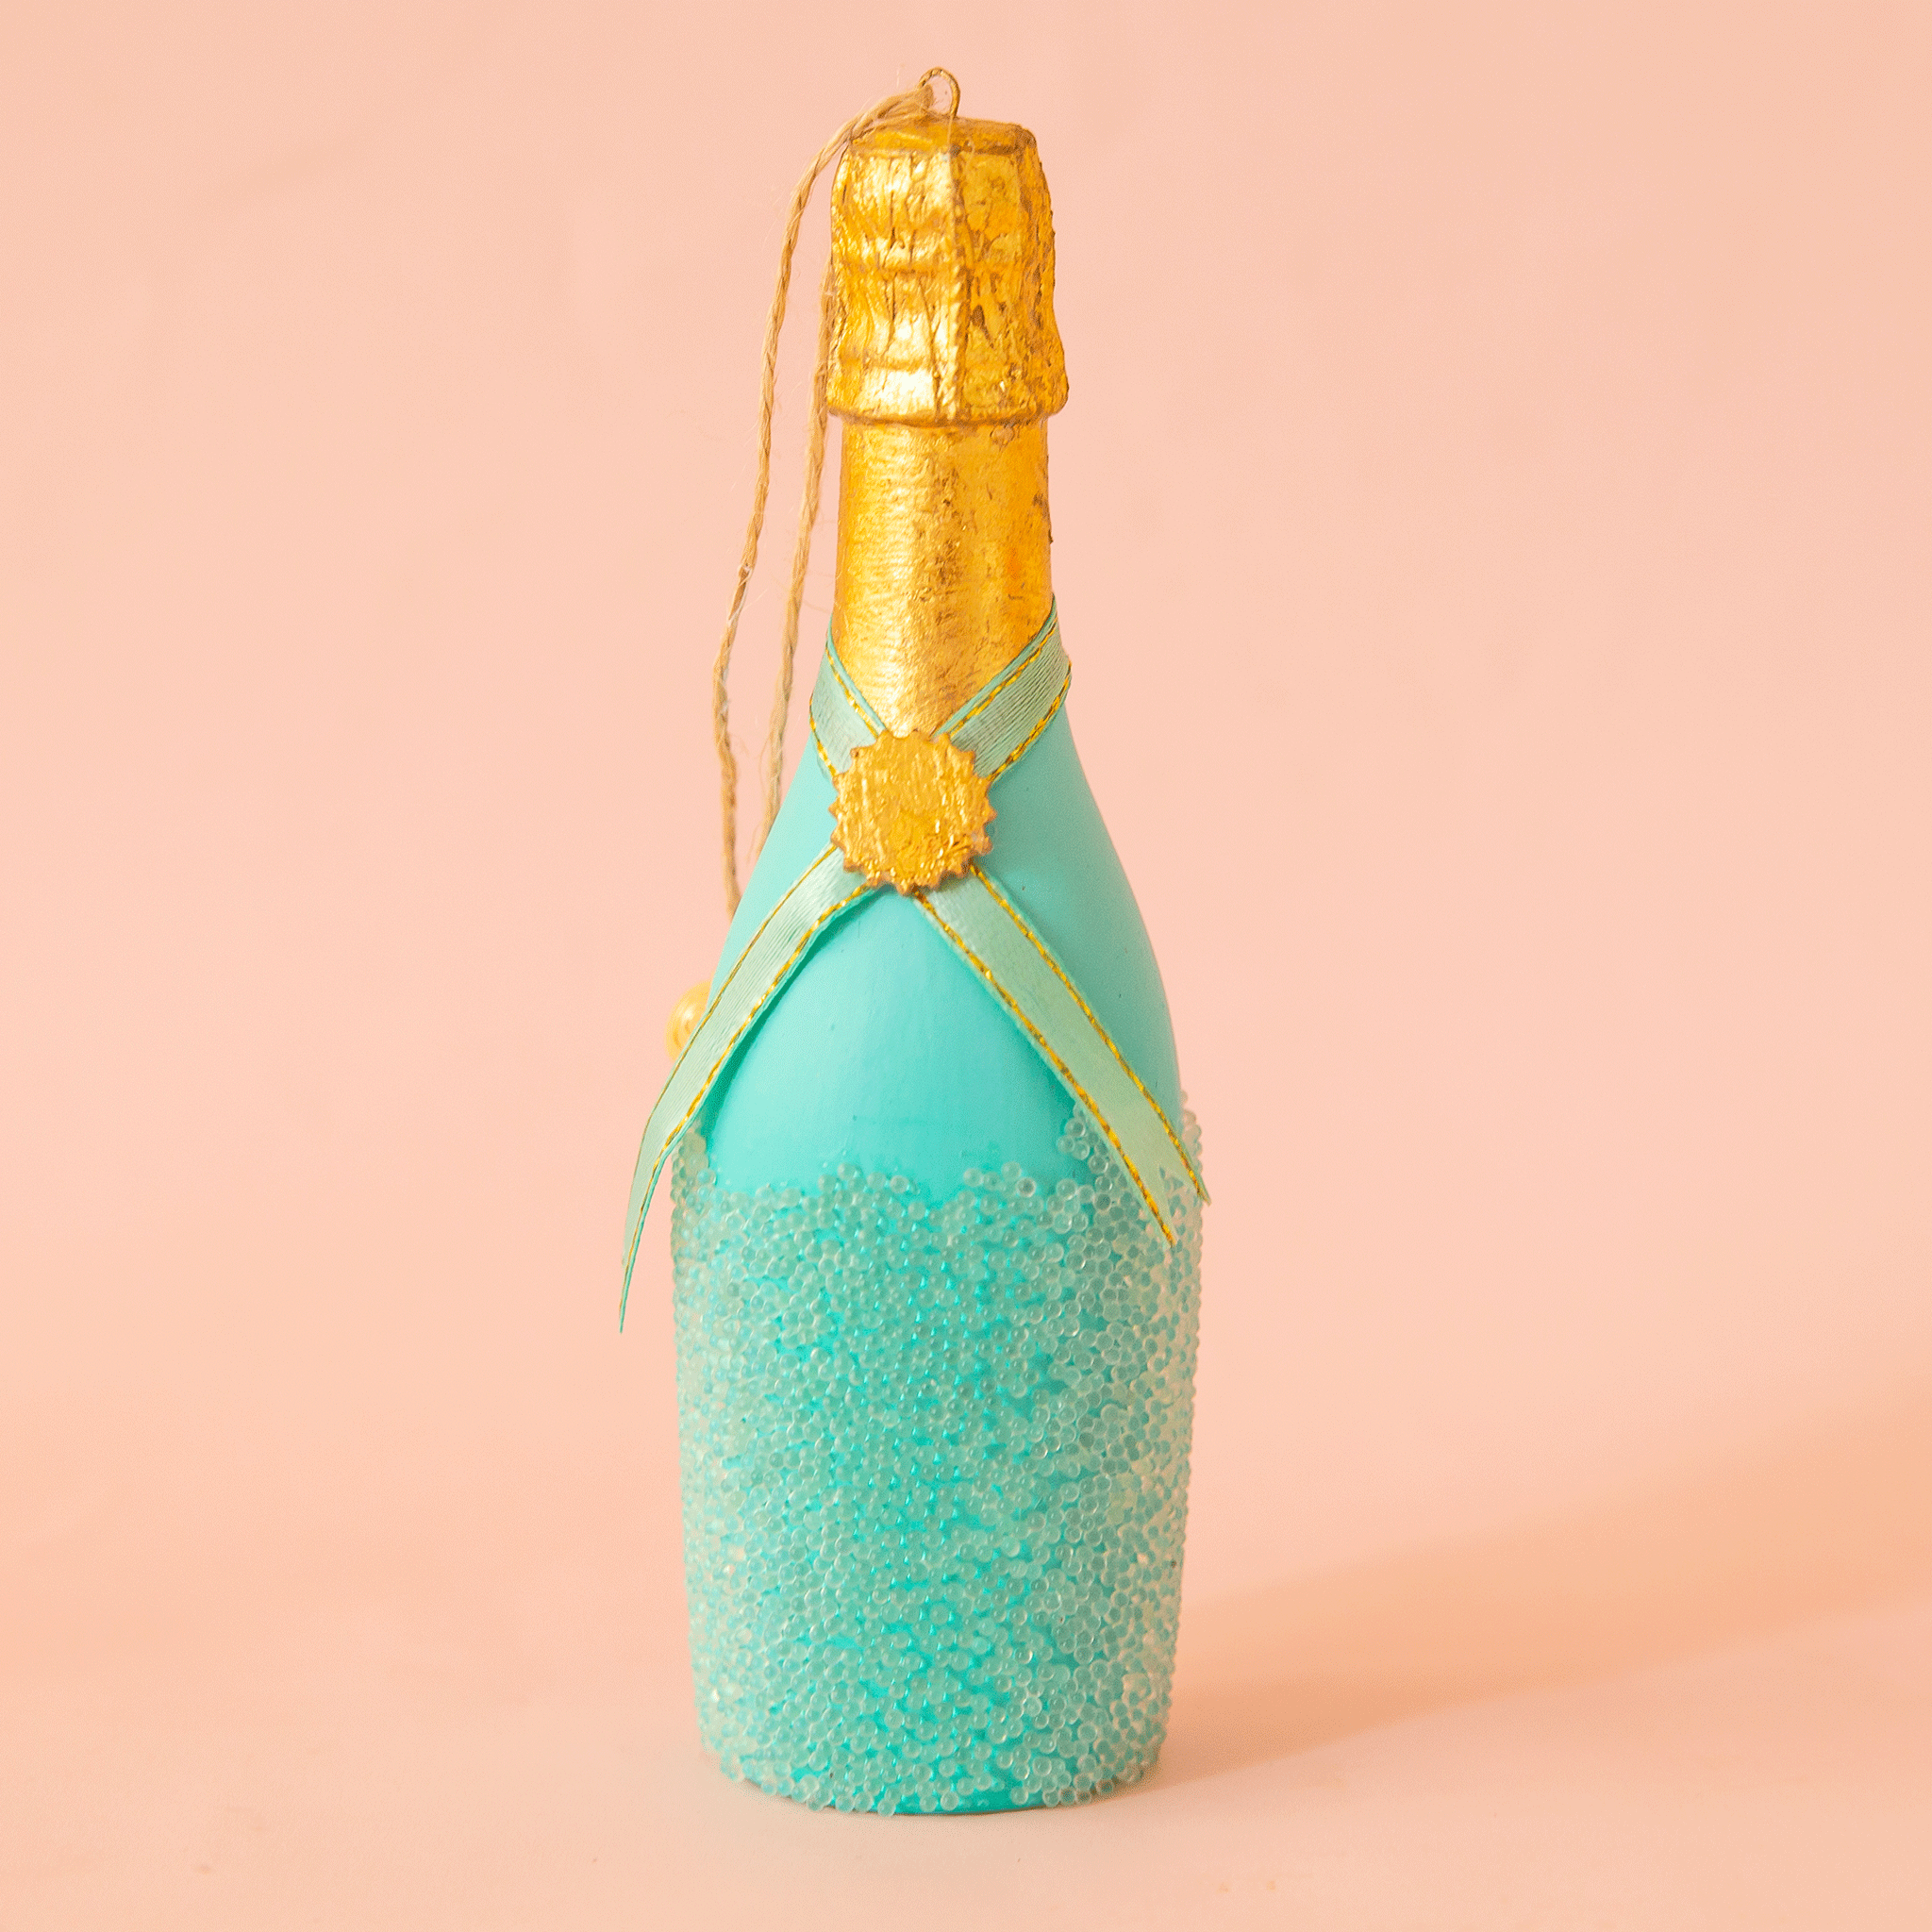 On a pink background is a turquoise champagne bottle shaped ornament. 